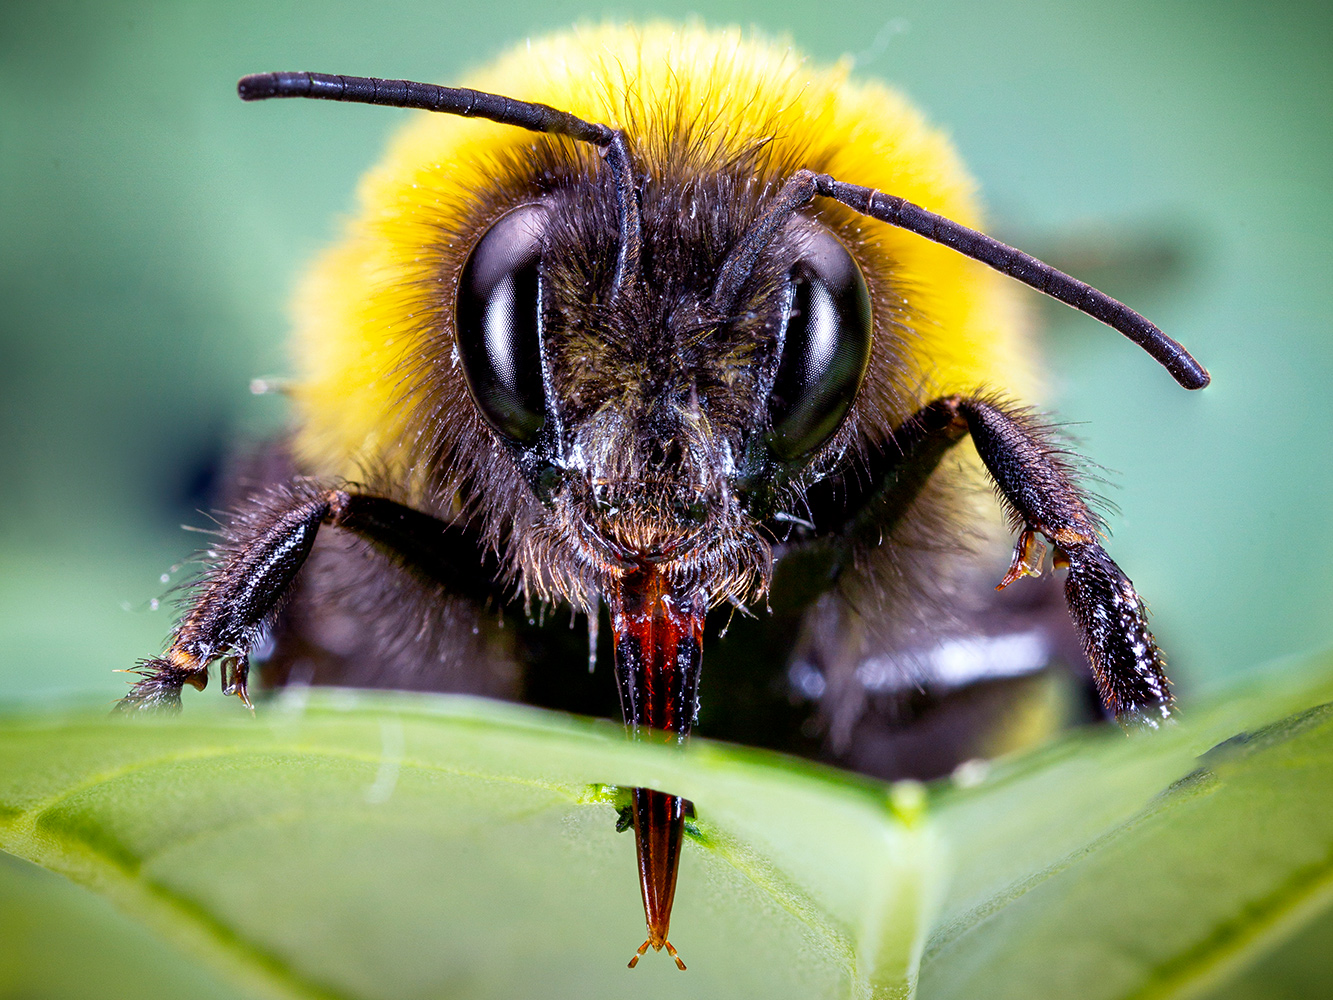 Enlarged view: If bumblebees find too little pollen, they pierce the leaves of non-flowering plants in order to force them to produce flowers more quickly. (Photograph: Hannier Pulido / ETH Zurich)